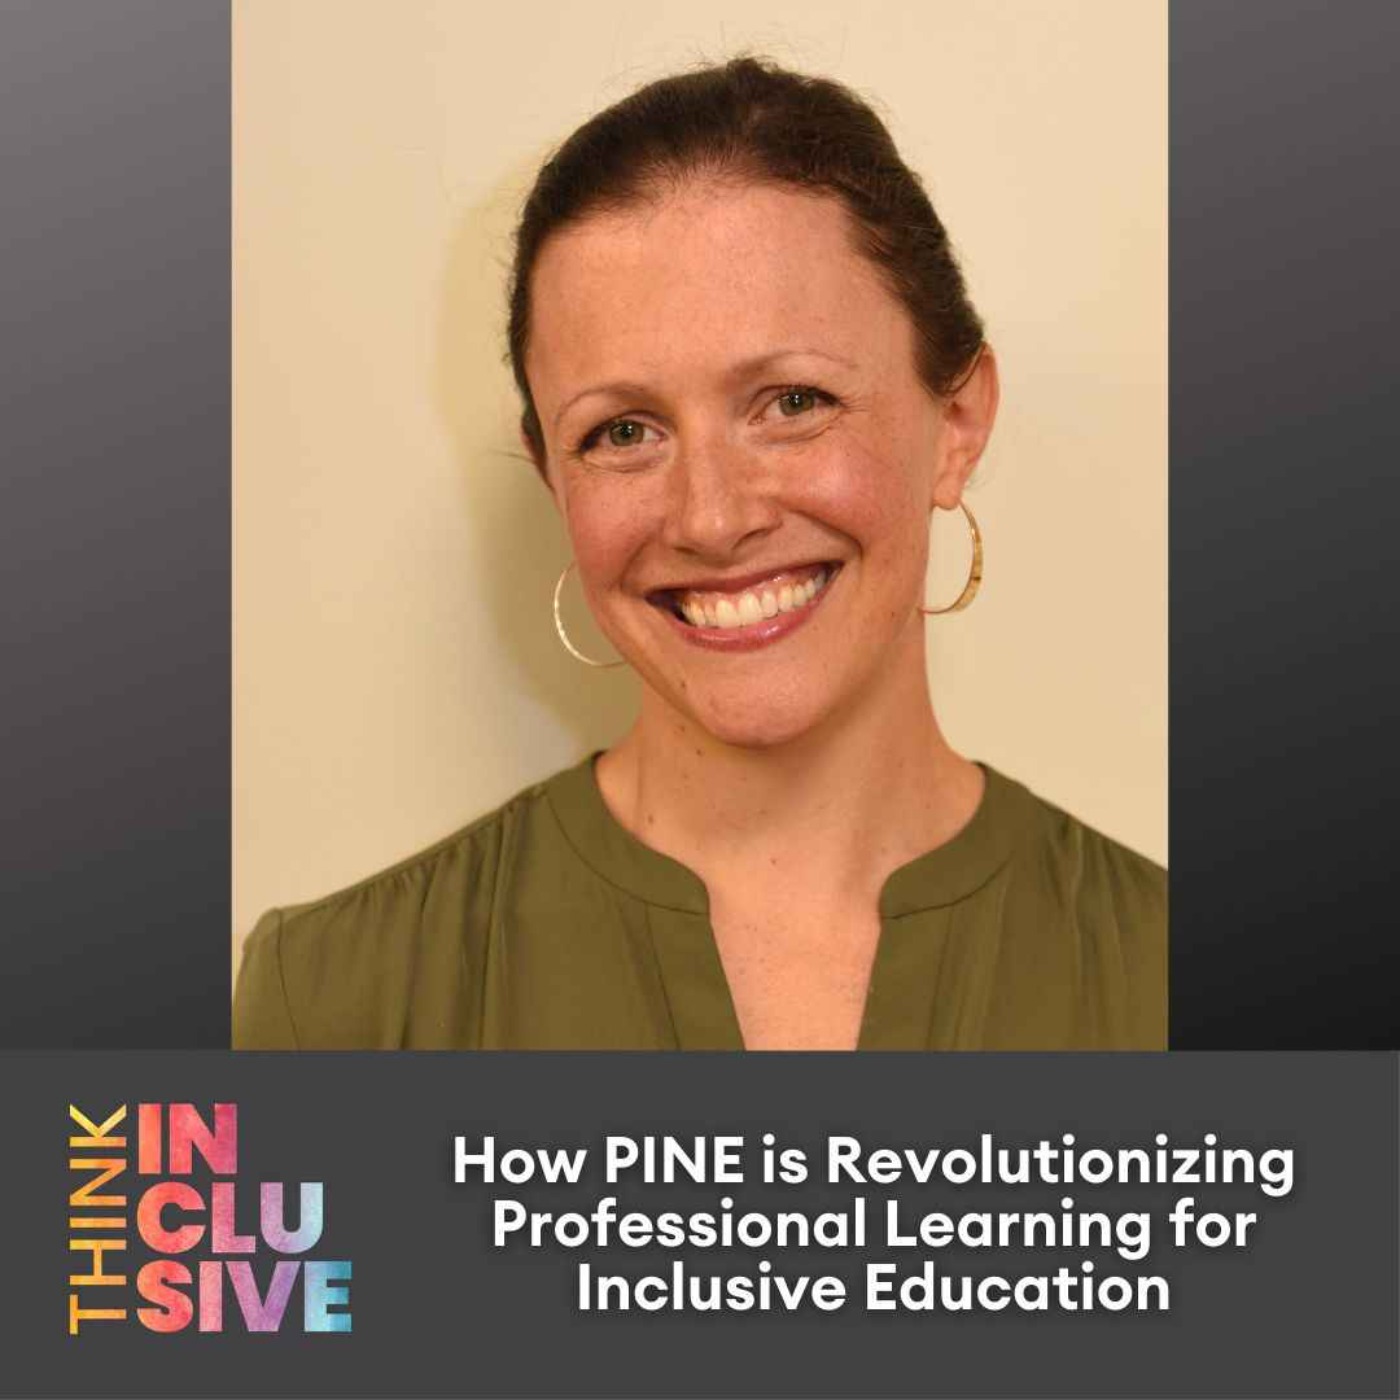 How PINE is Revolutionizing Professional Learning for Inclusive Education